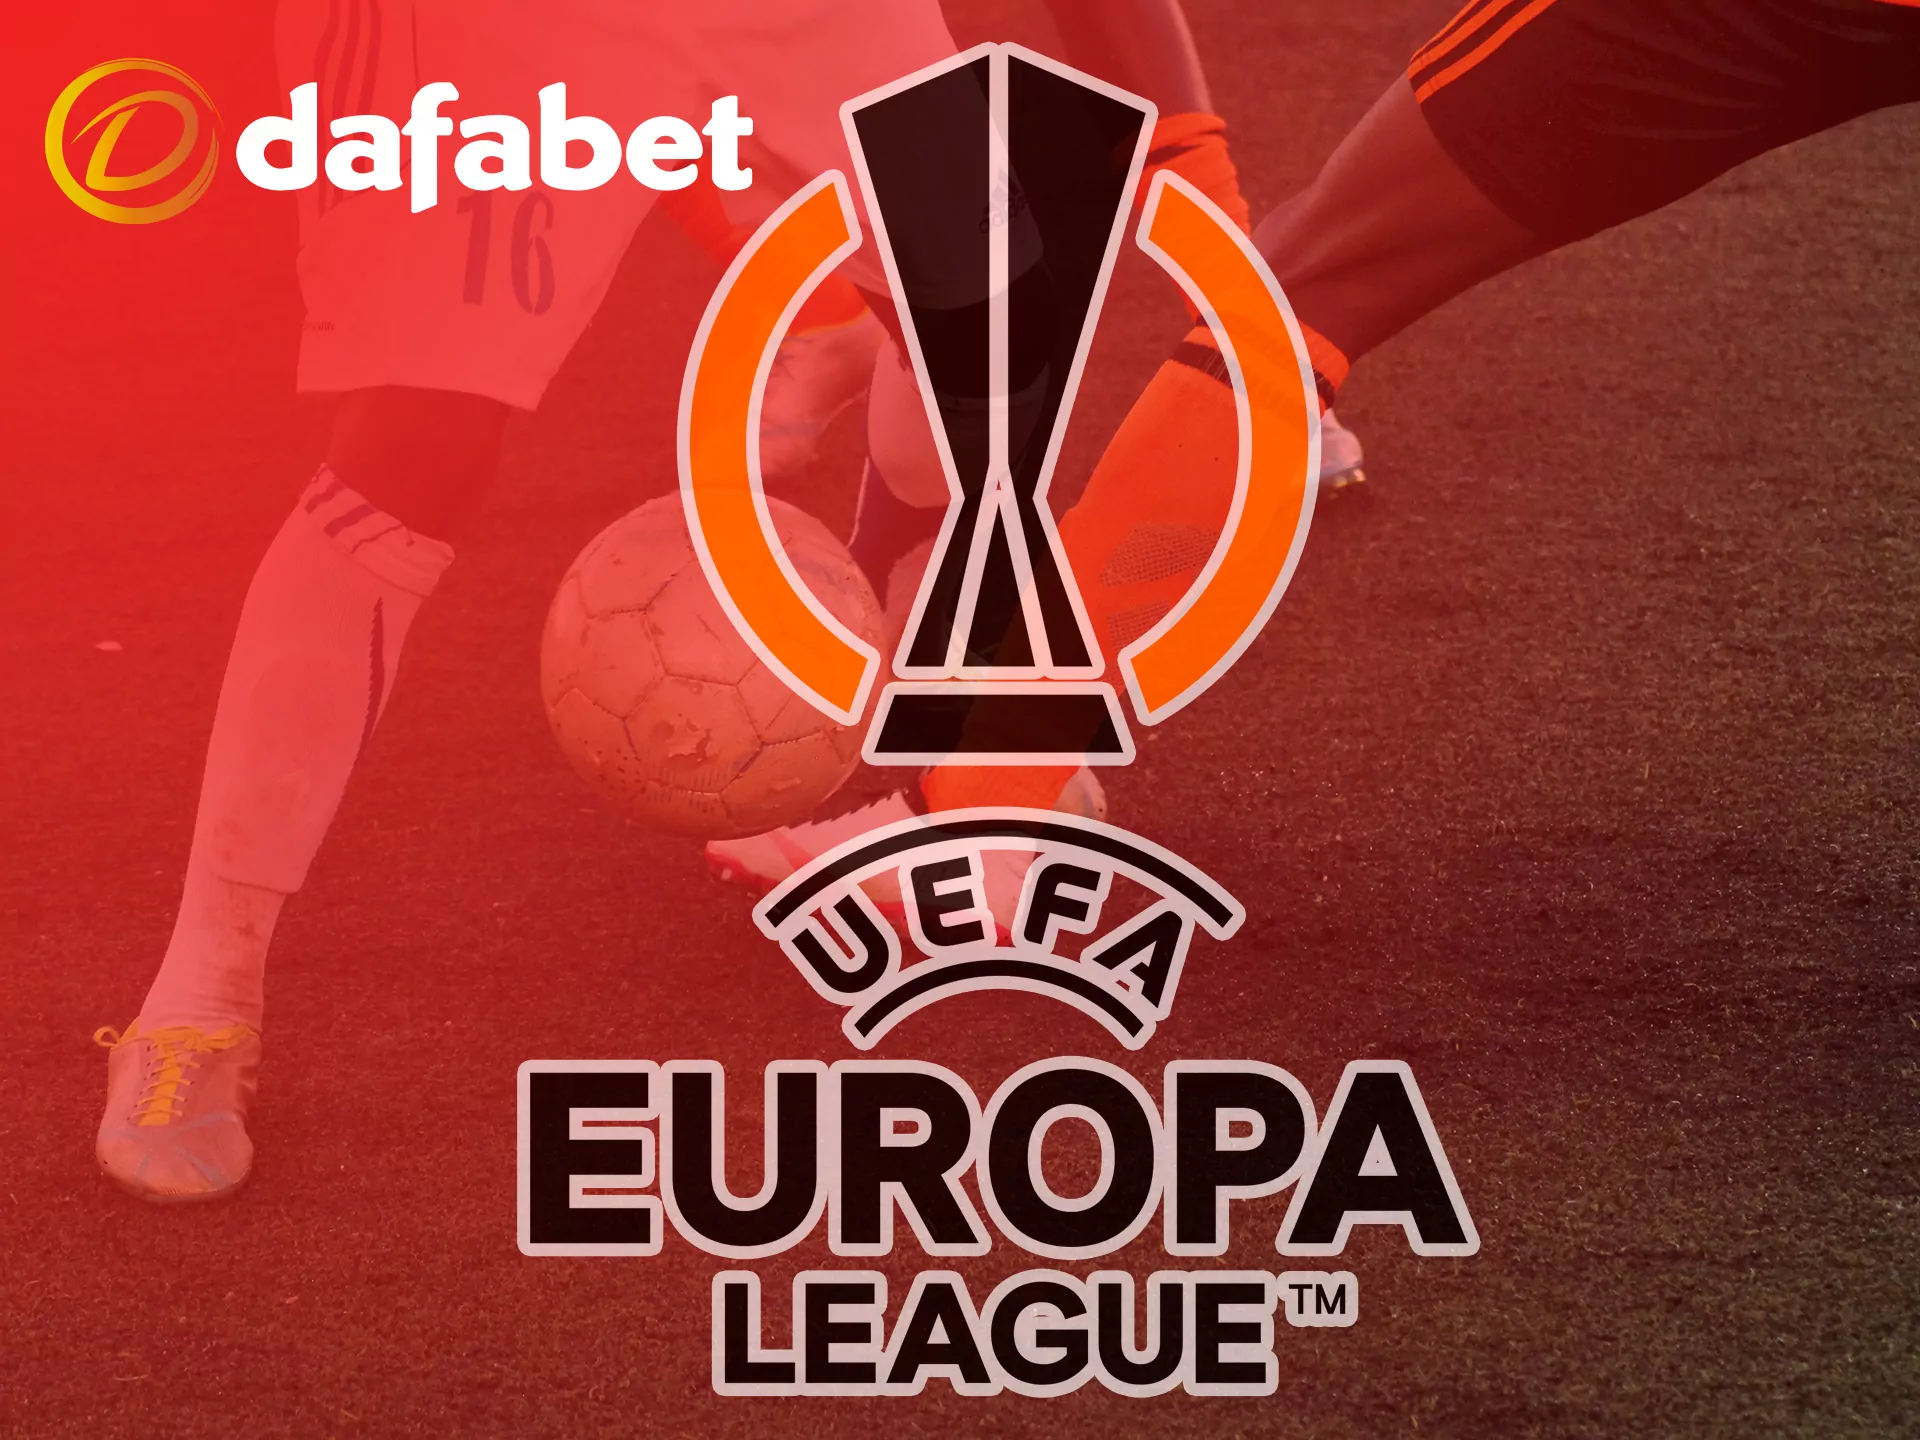 With a huge number of odds in Dafabet, it is a strong competitor to other betting sites.